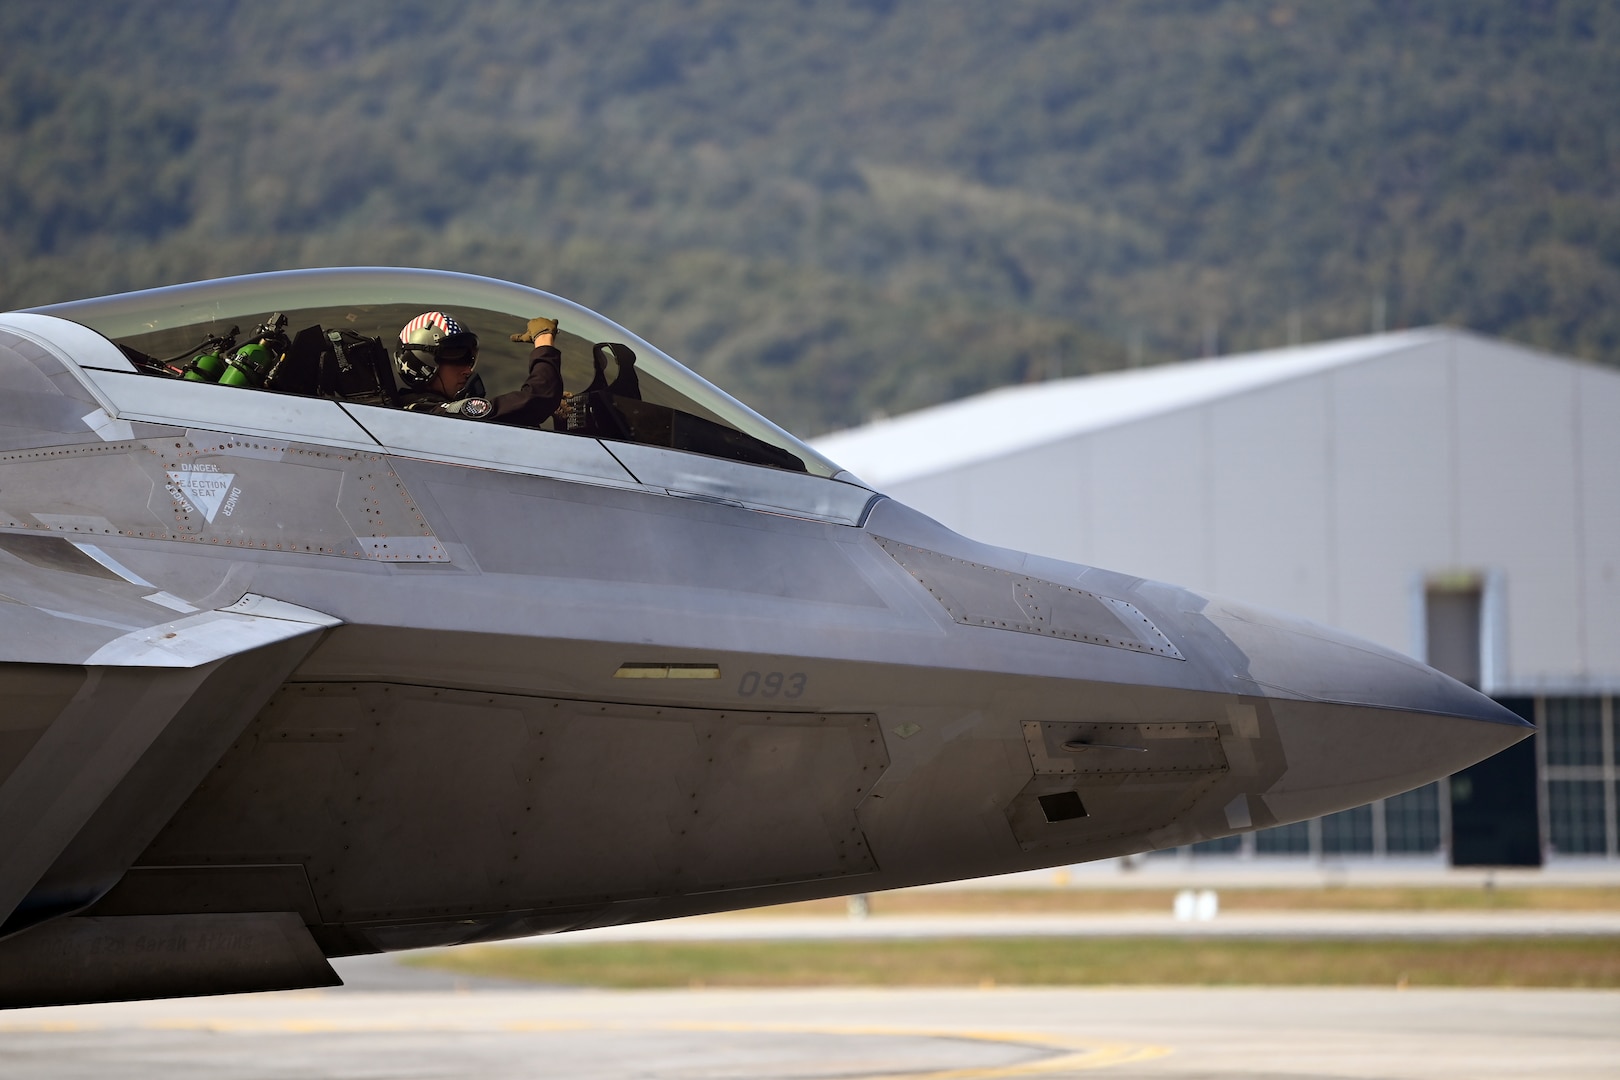 U.S. Air Force Capt. Samuel Larson, F-22 Demonstration Team commander, Joint Base Langley-Eustis, Va., prepares to take off during the 2023 Seoul International Aerospace and Defense Exhibition media day at Seoul Air Base, Republic of Korea, Oct. 16, 2023.